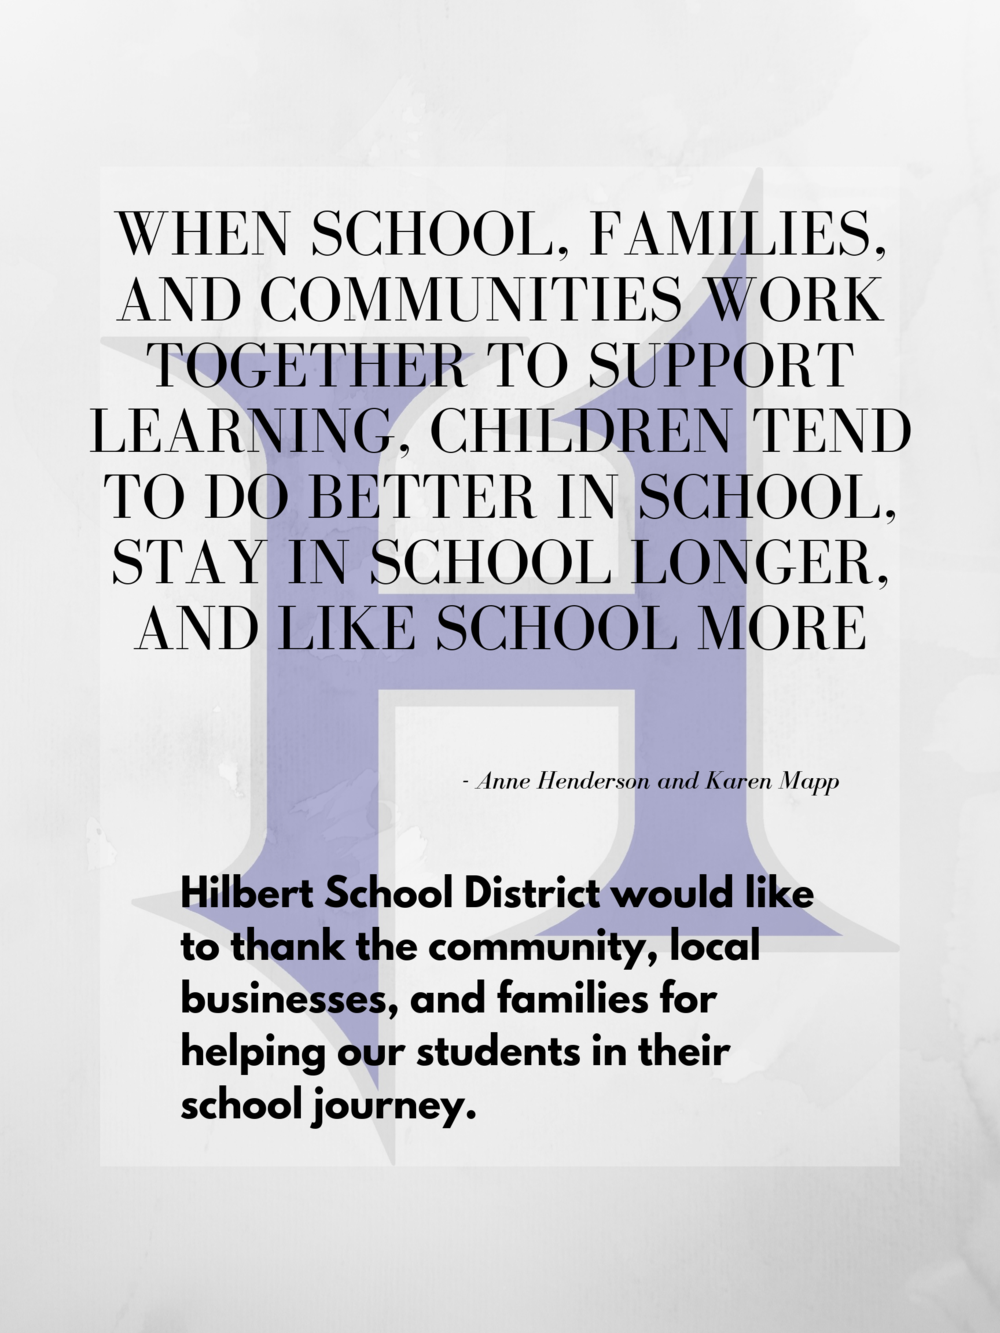 Poster : When schools, families, and communities work together to support learning, children tend to do better in school, stay in school longer, and like school more. Hilbert School Distric would like to thank the community, local businesses, and families